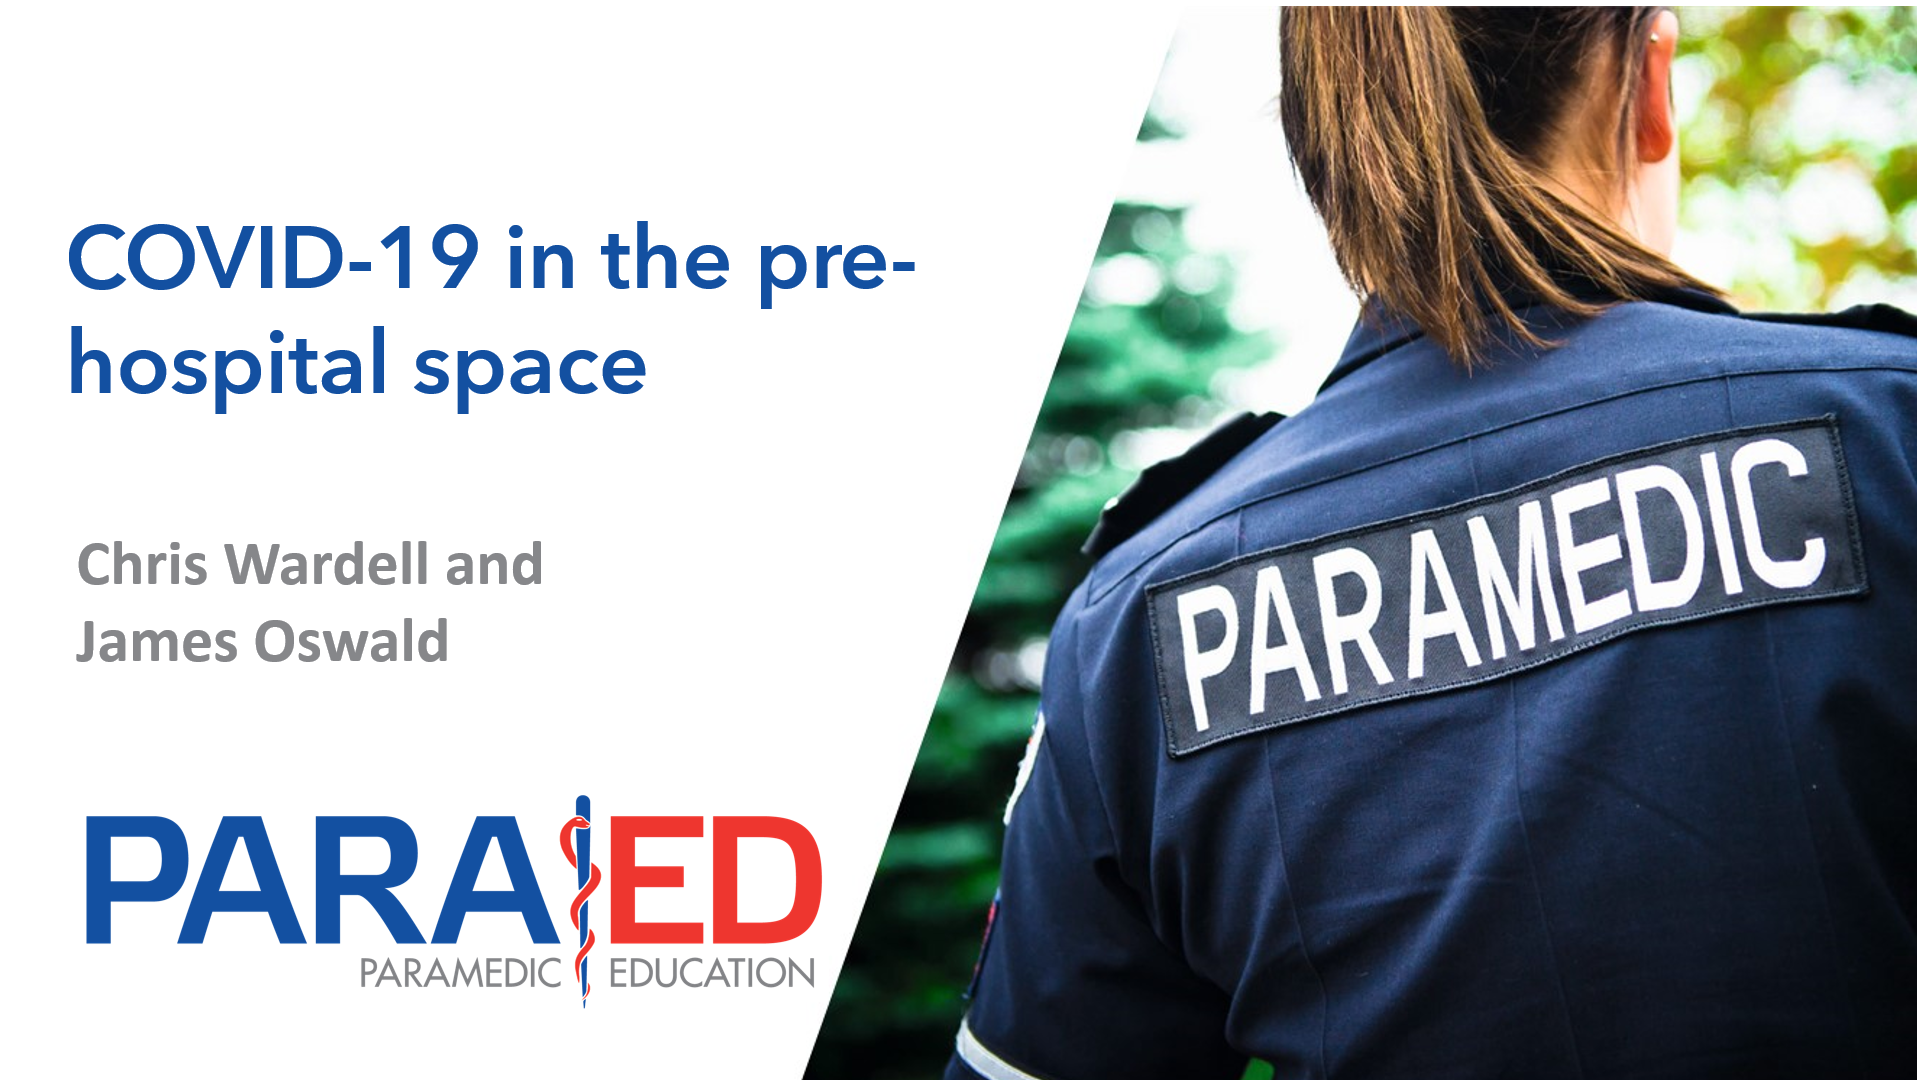 COVID-19 in the pre-hospital space